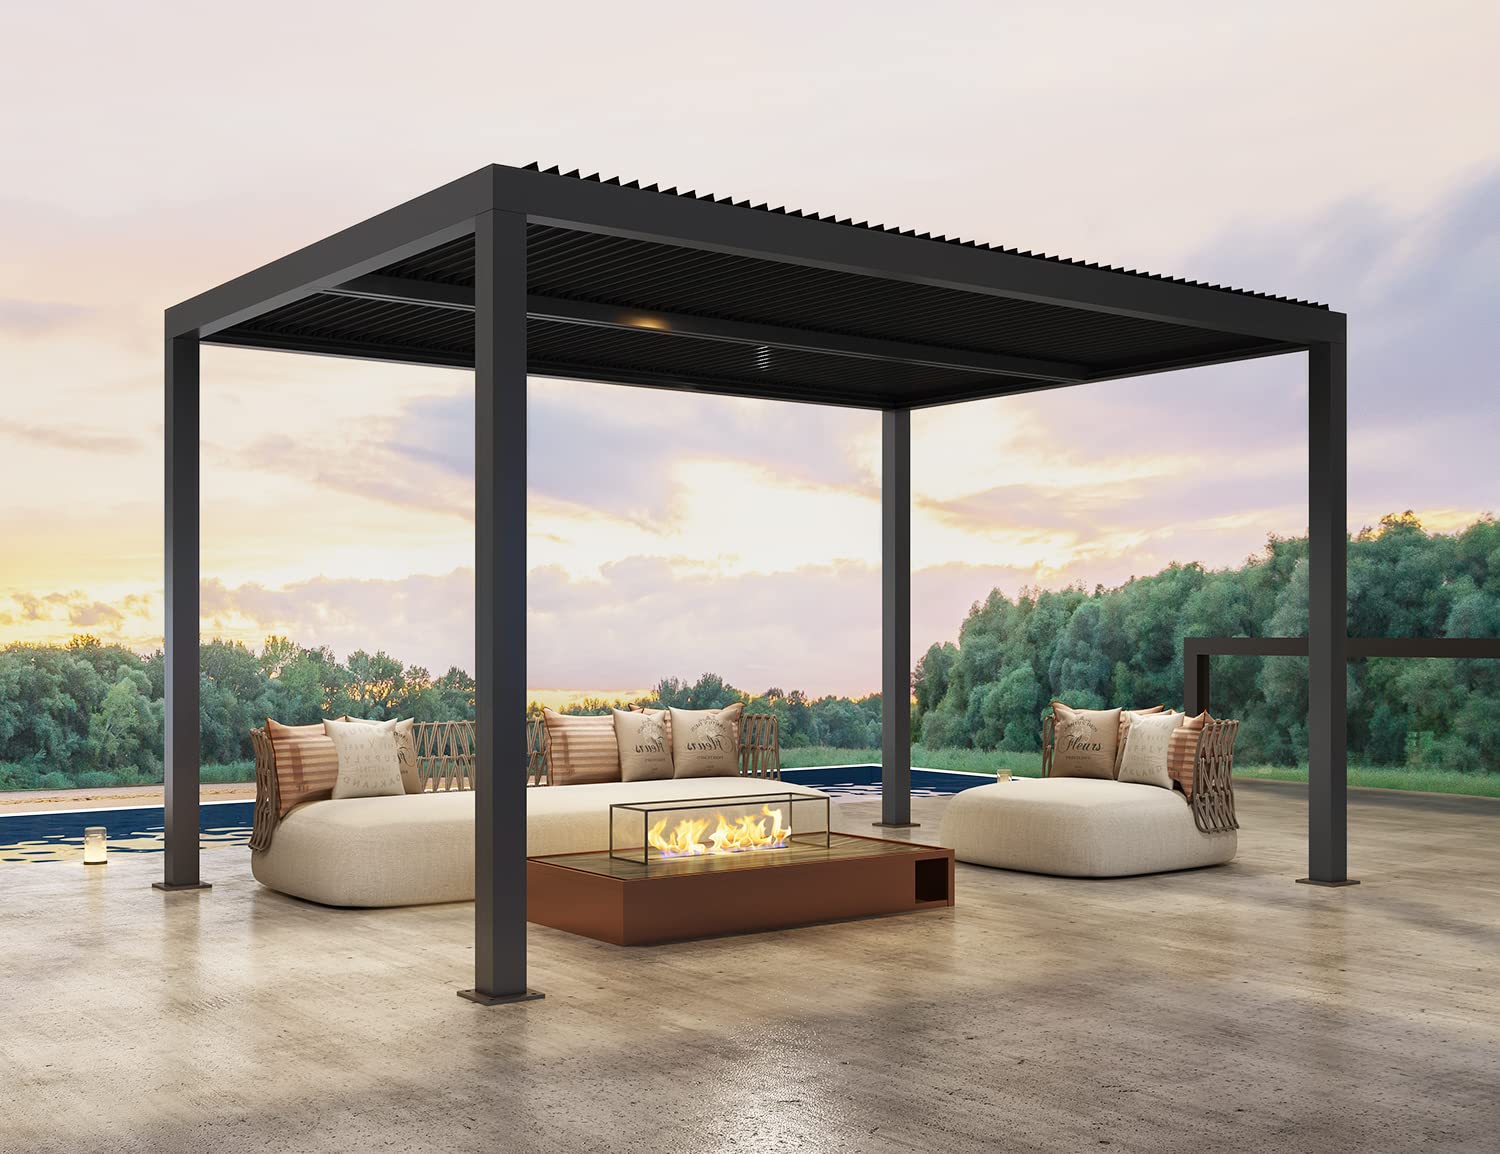 How Much Weight Can An Aluminum Pergola Hold?